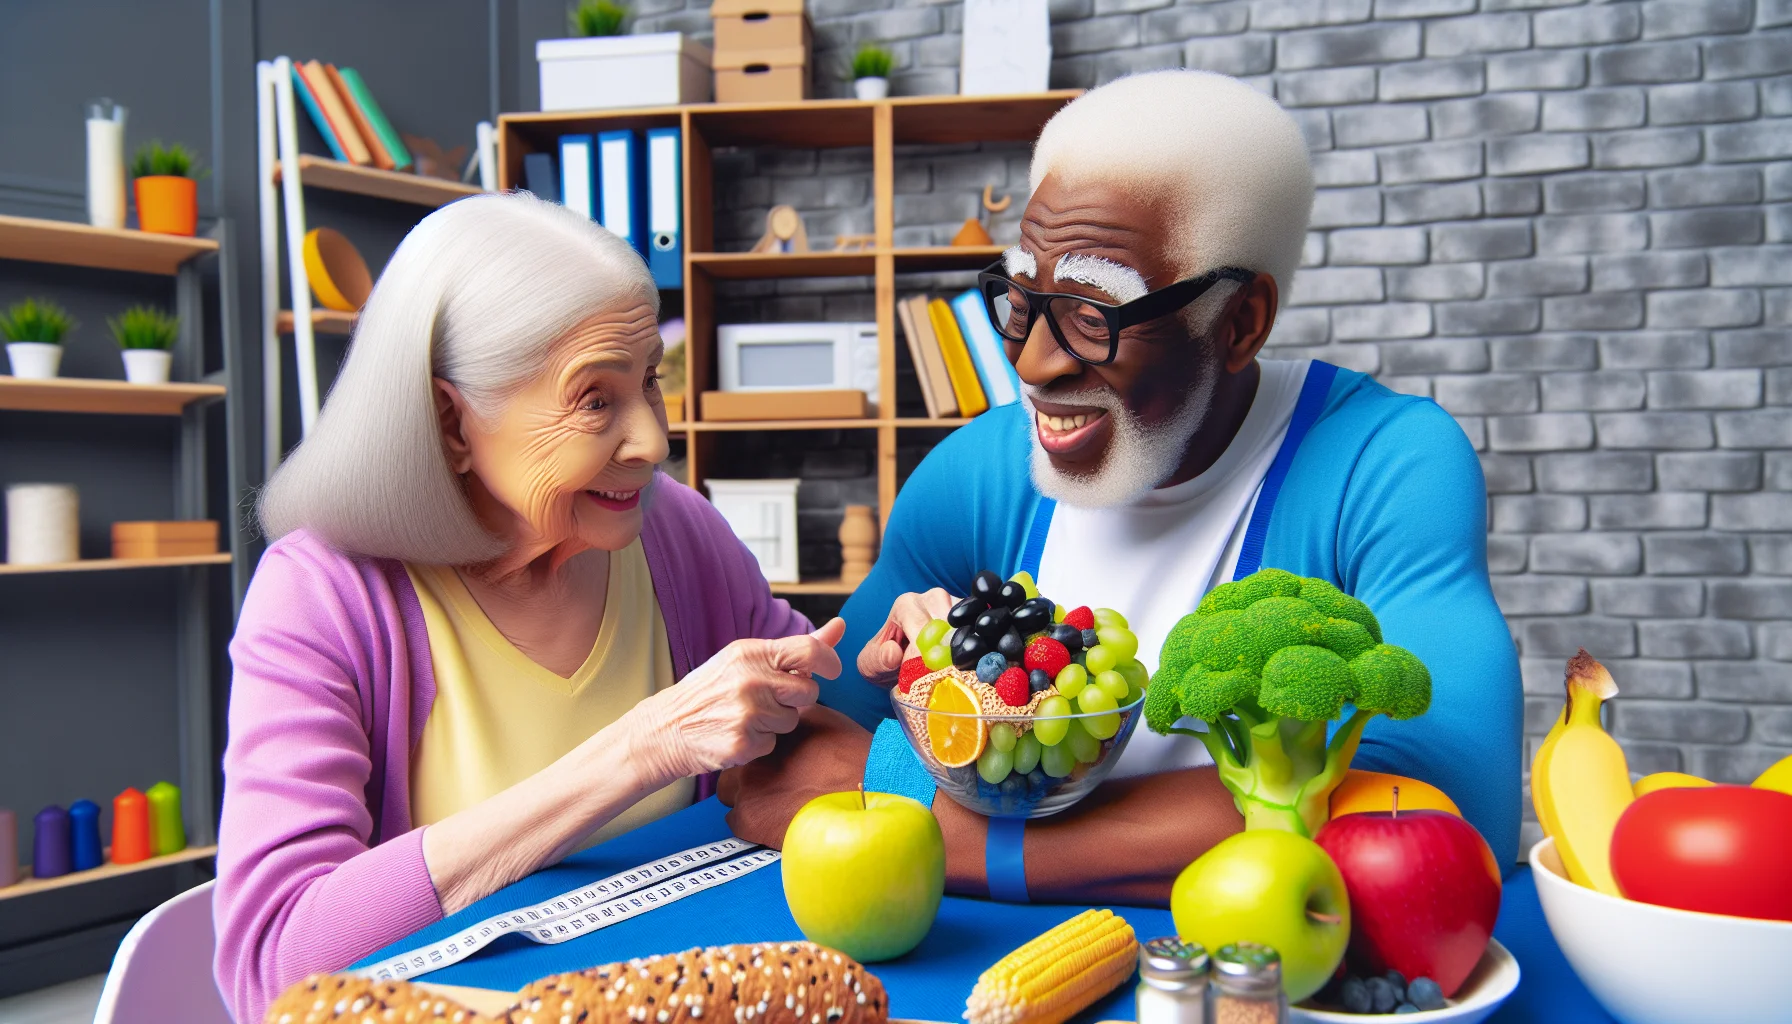 Create a humorous and realistic image focusing on high-fiber foods for children. To set a context, imagine an unusual situation where an old lady, perhaps a Caucasian grandmother, and an old man, a Black grandfather, are having a humorous misunderstanding about their dietary needs, emphasizing the benefits of eating healthy. Let the setting be vibrant and engaging to make it appealing to kids.